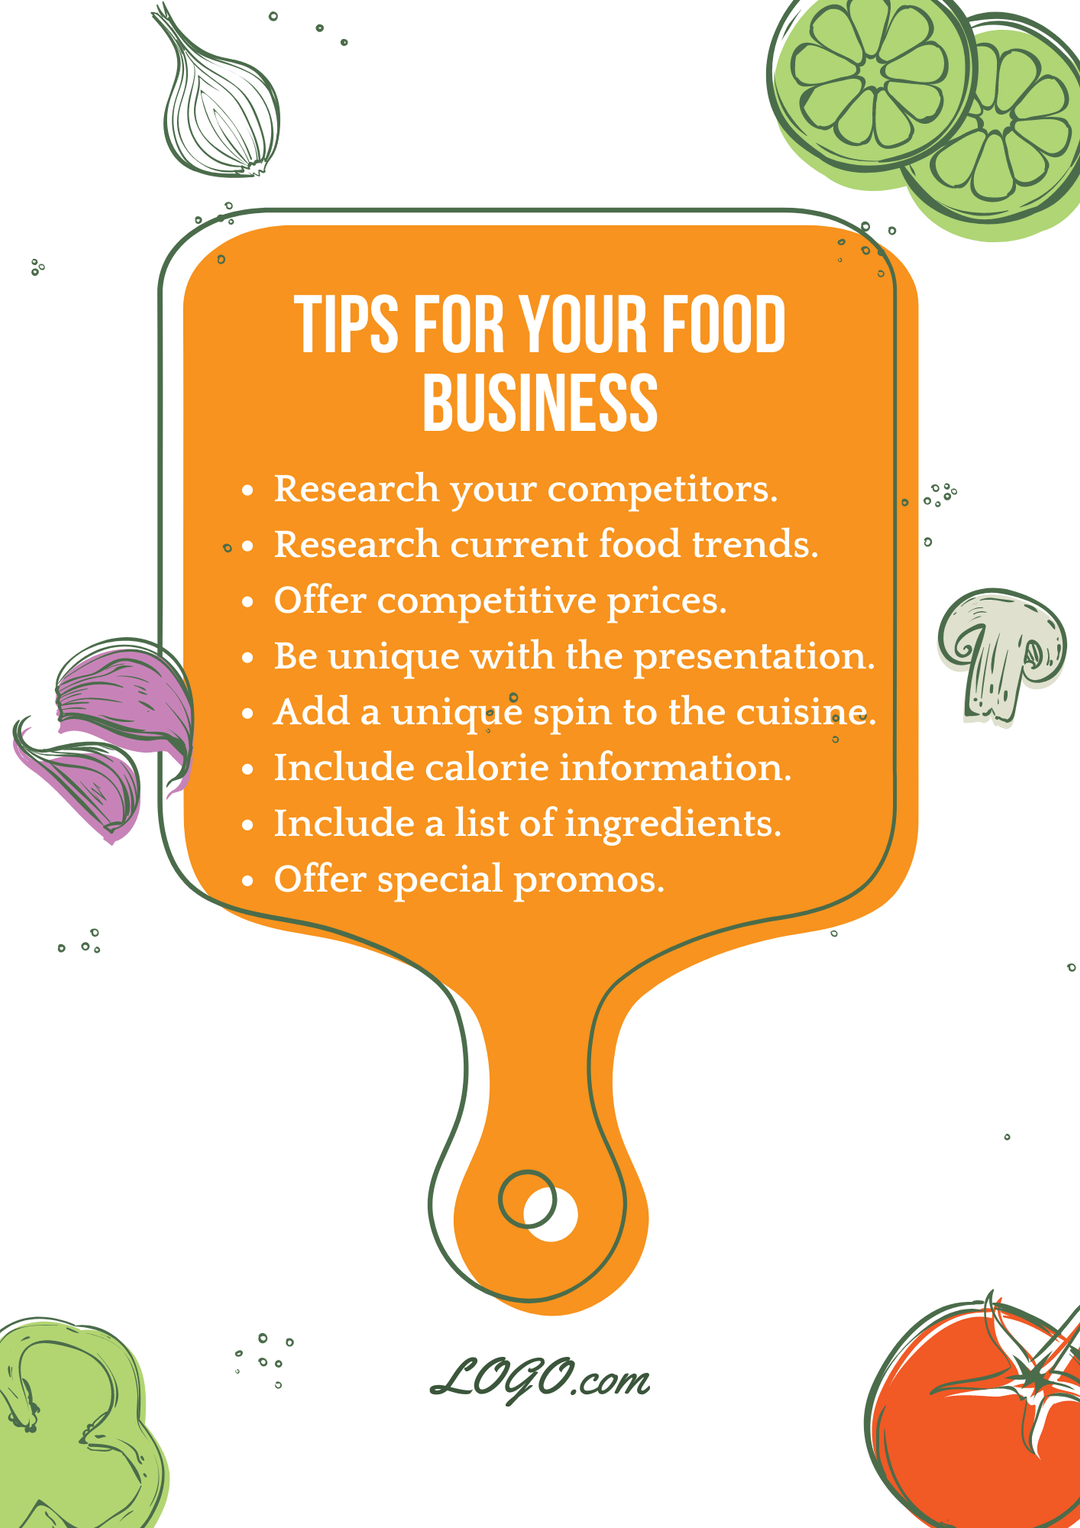 Tips to promote your food business